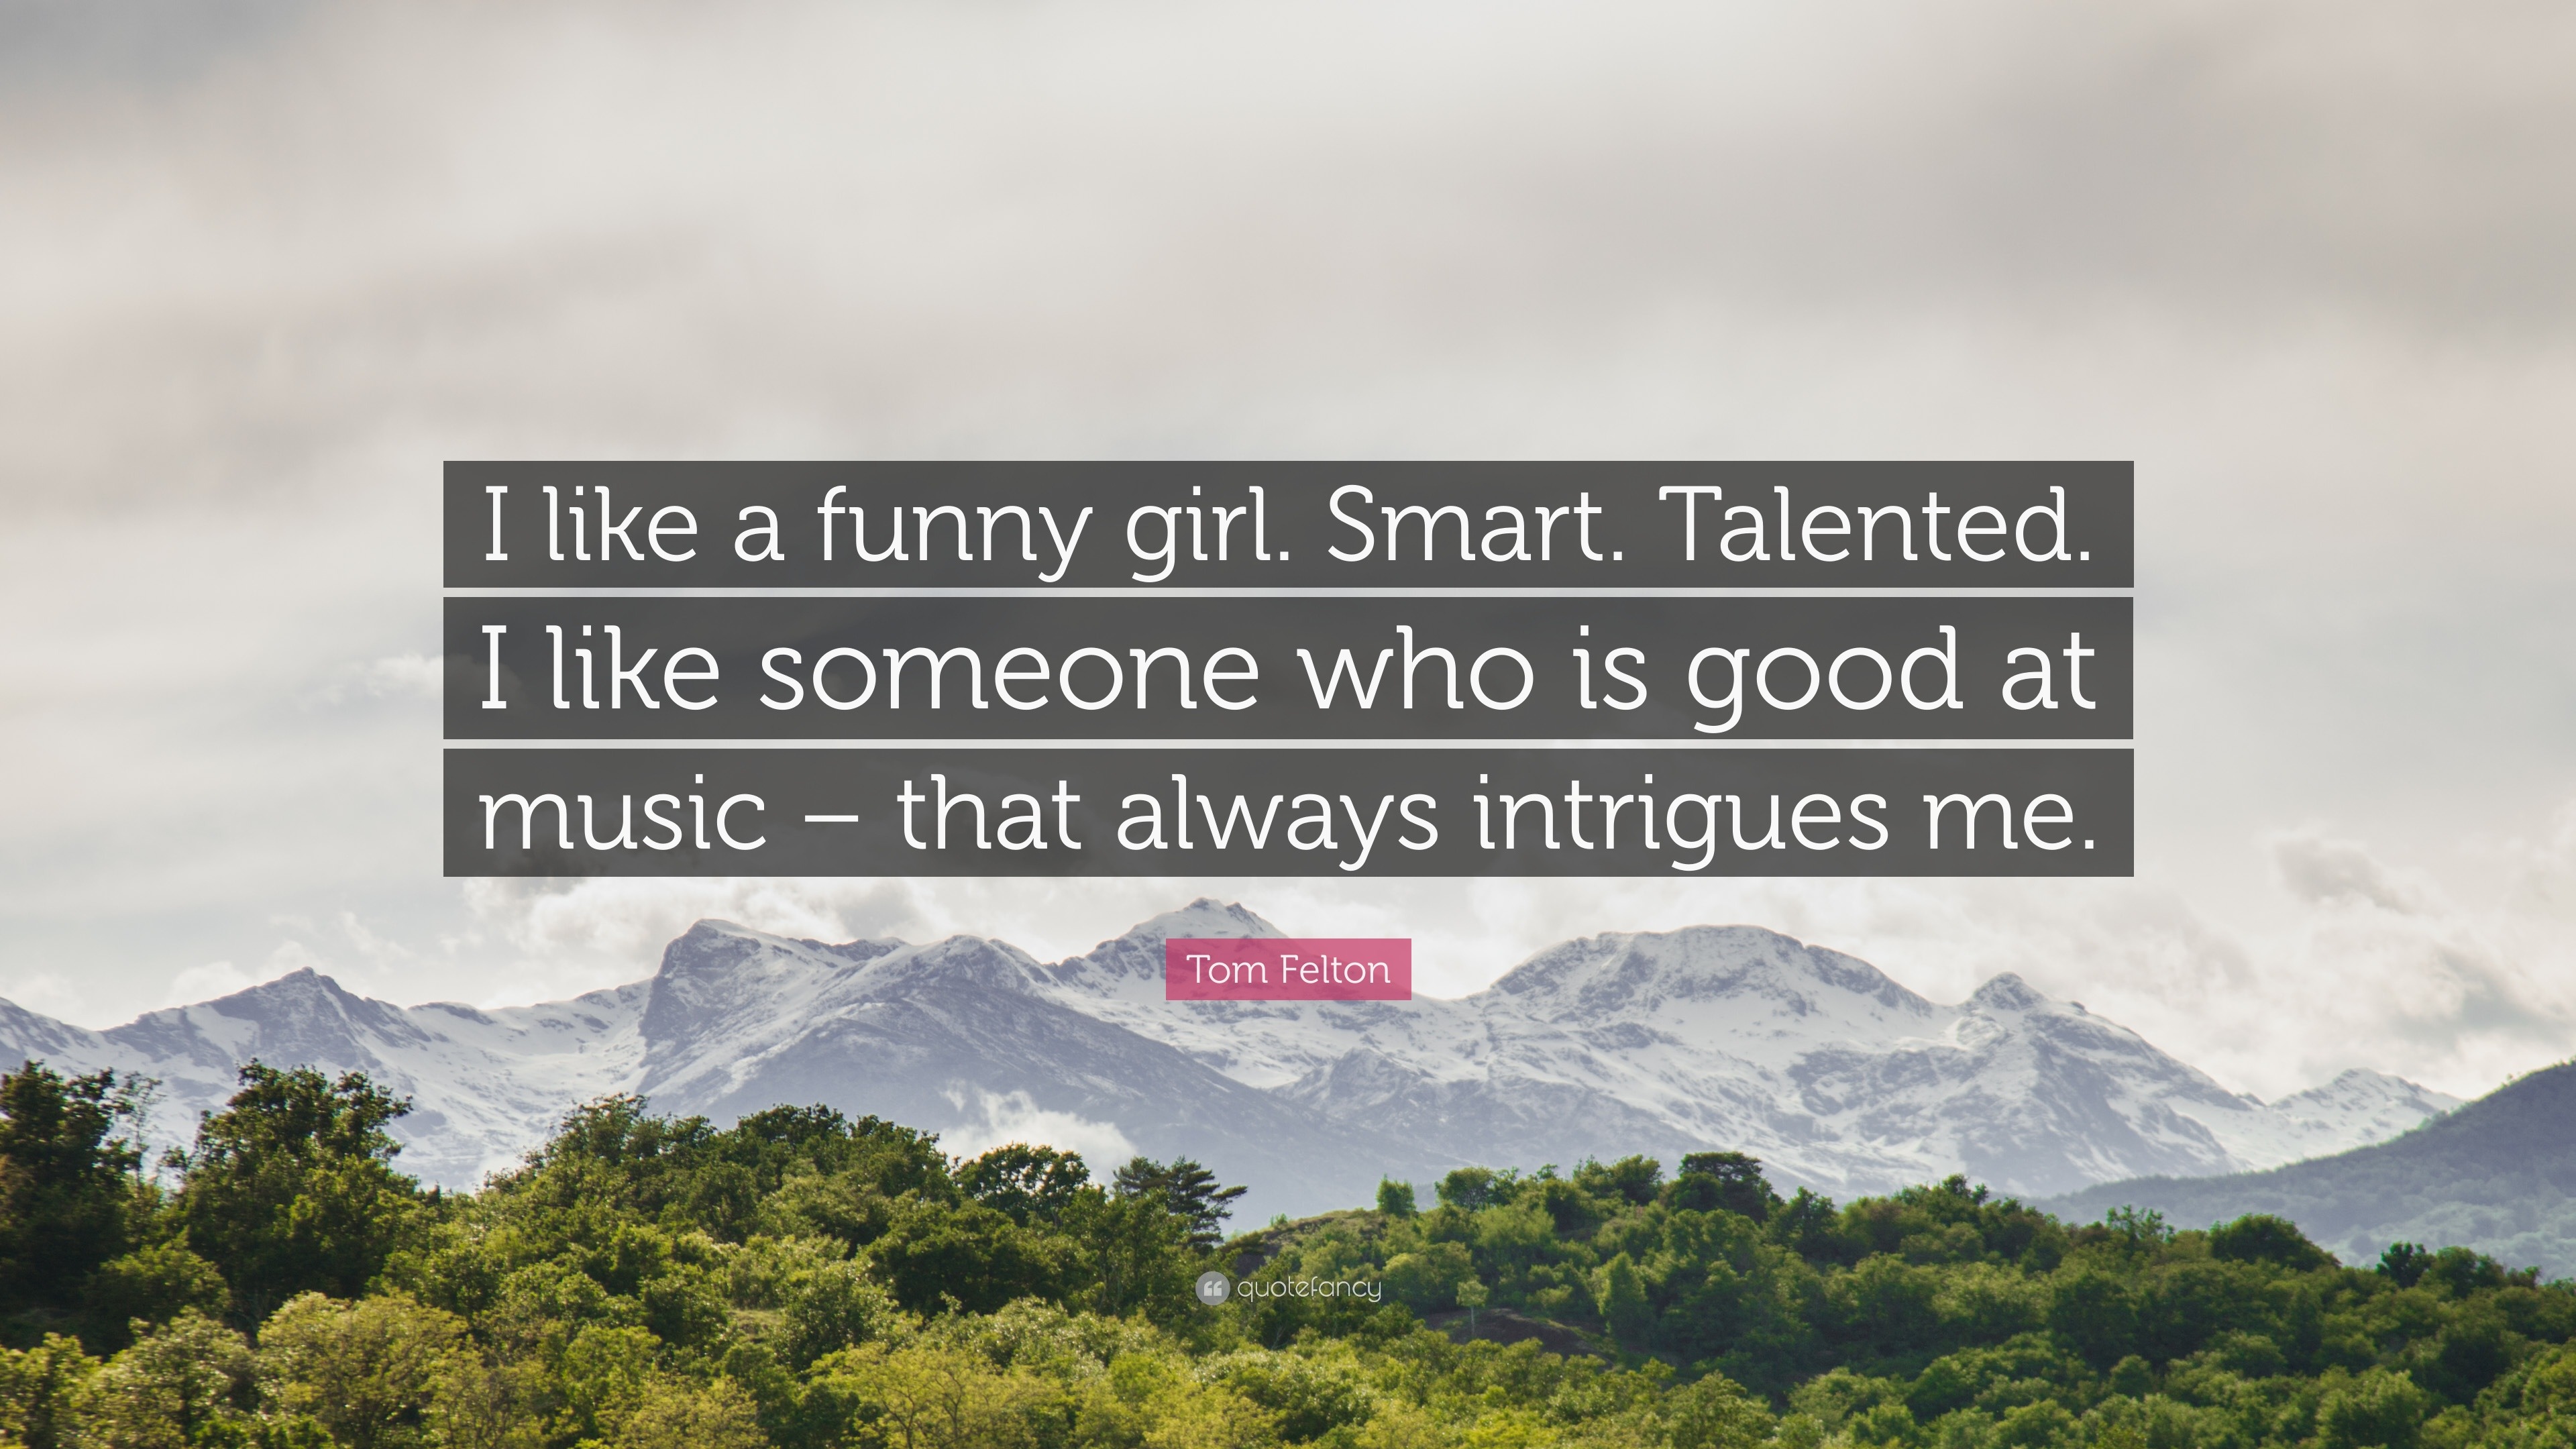 smart girls quotes